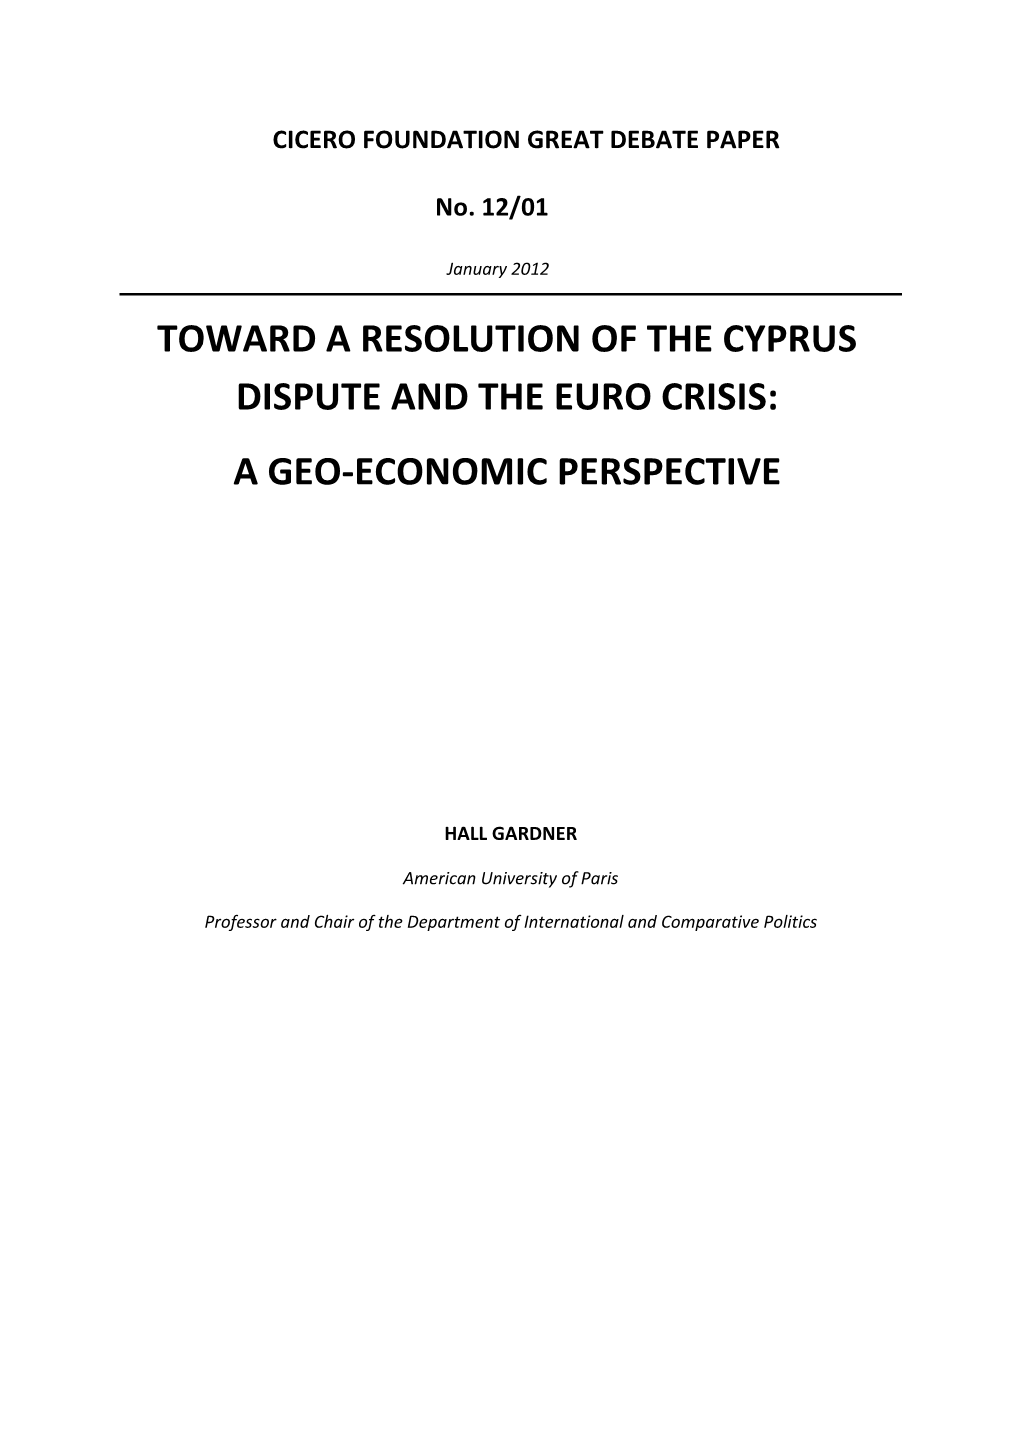 Toward a Resolution of the Cyprus Dispute and the Euro Crisis: a Geo-Economic Perspective